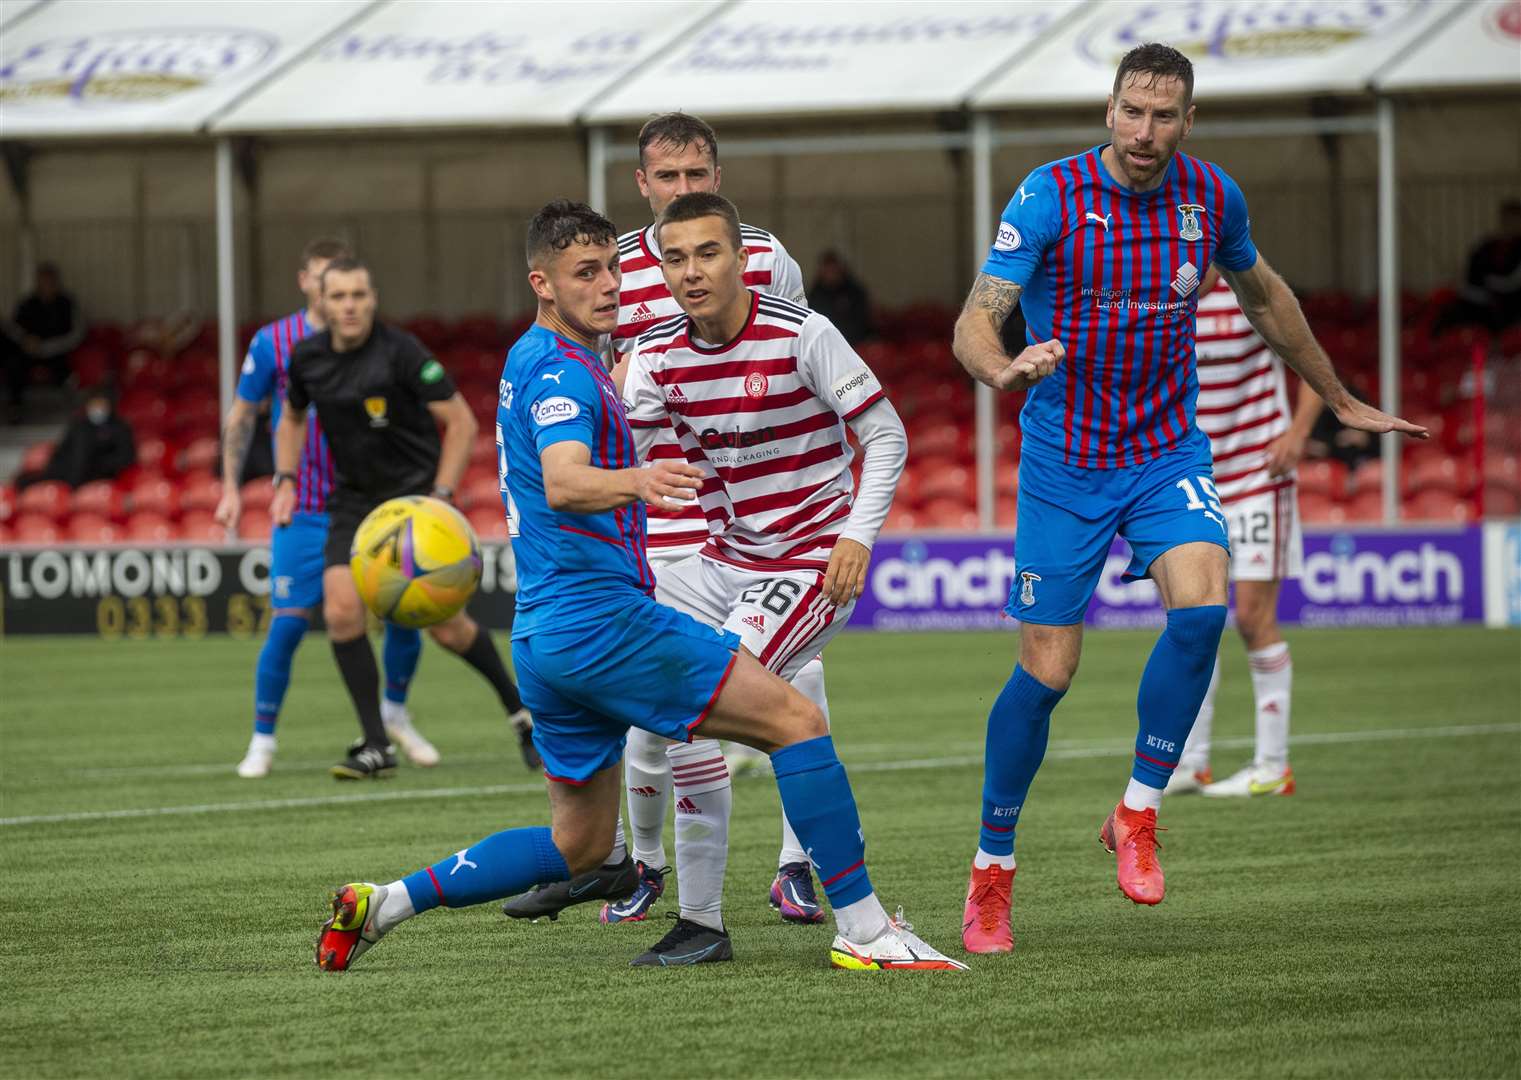 Cameron Harper (front left) in action against Hamilton in early October – his last full 90 minutes before Tuesday’s cup tie. Picture: Michael Schofield